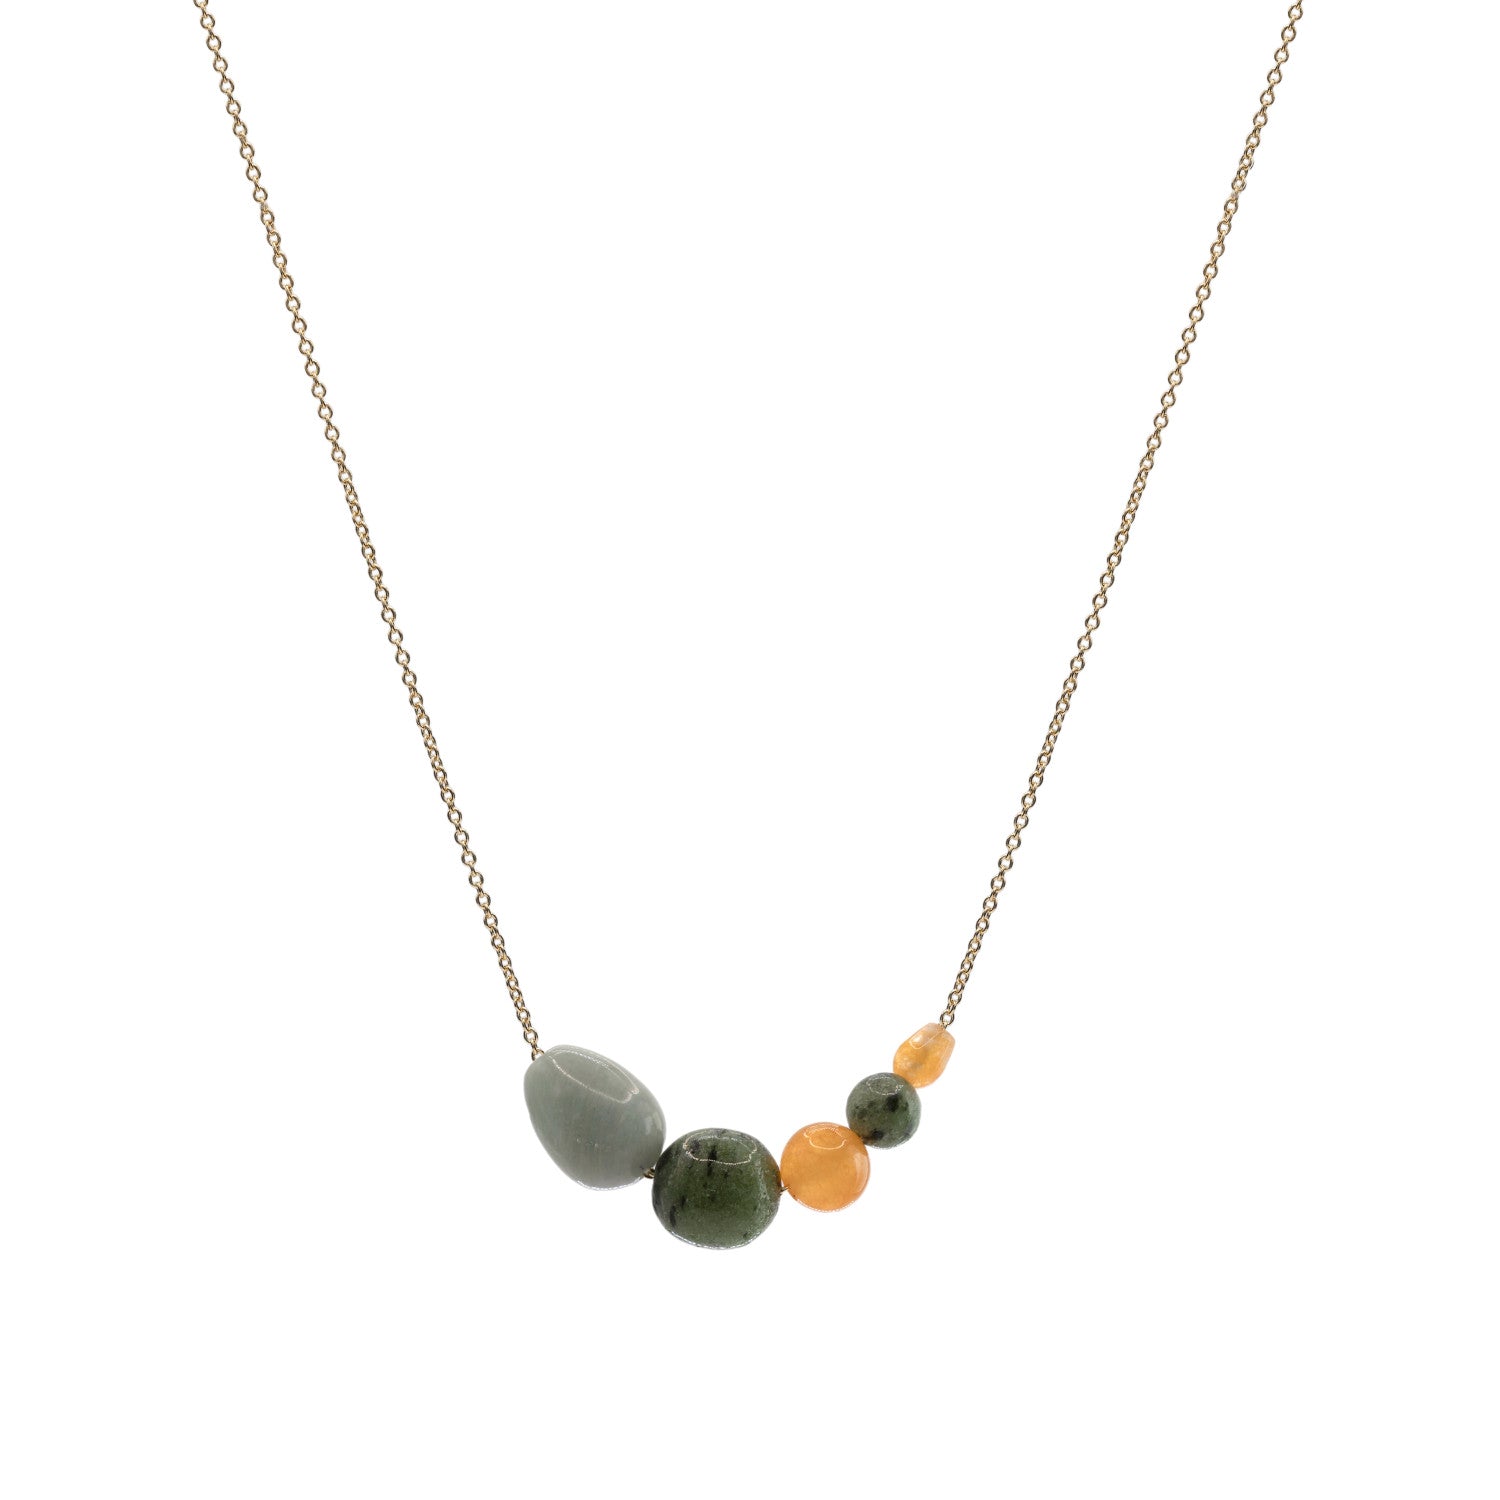 Necklaces with natural stones in nature tone